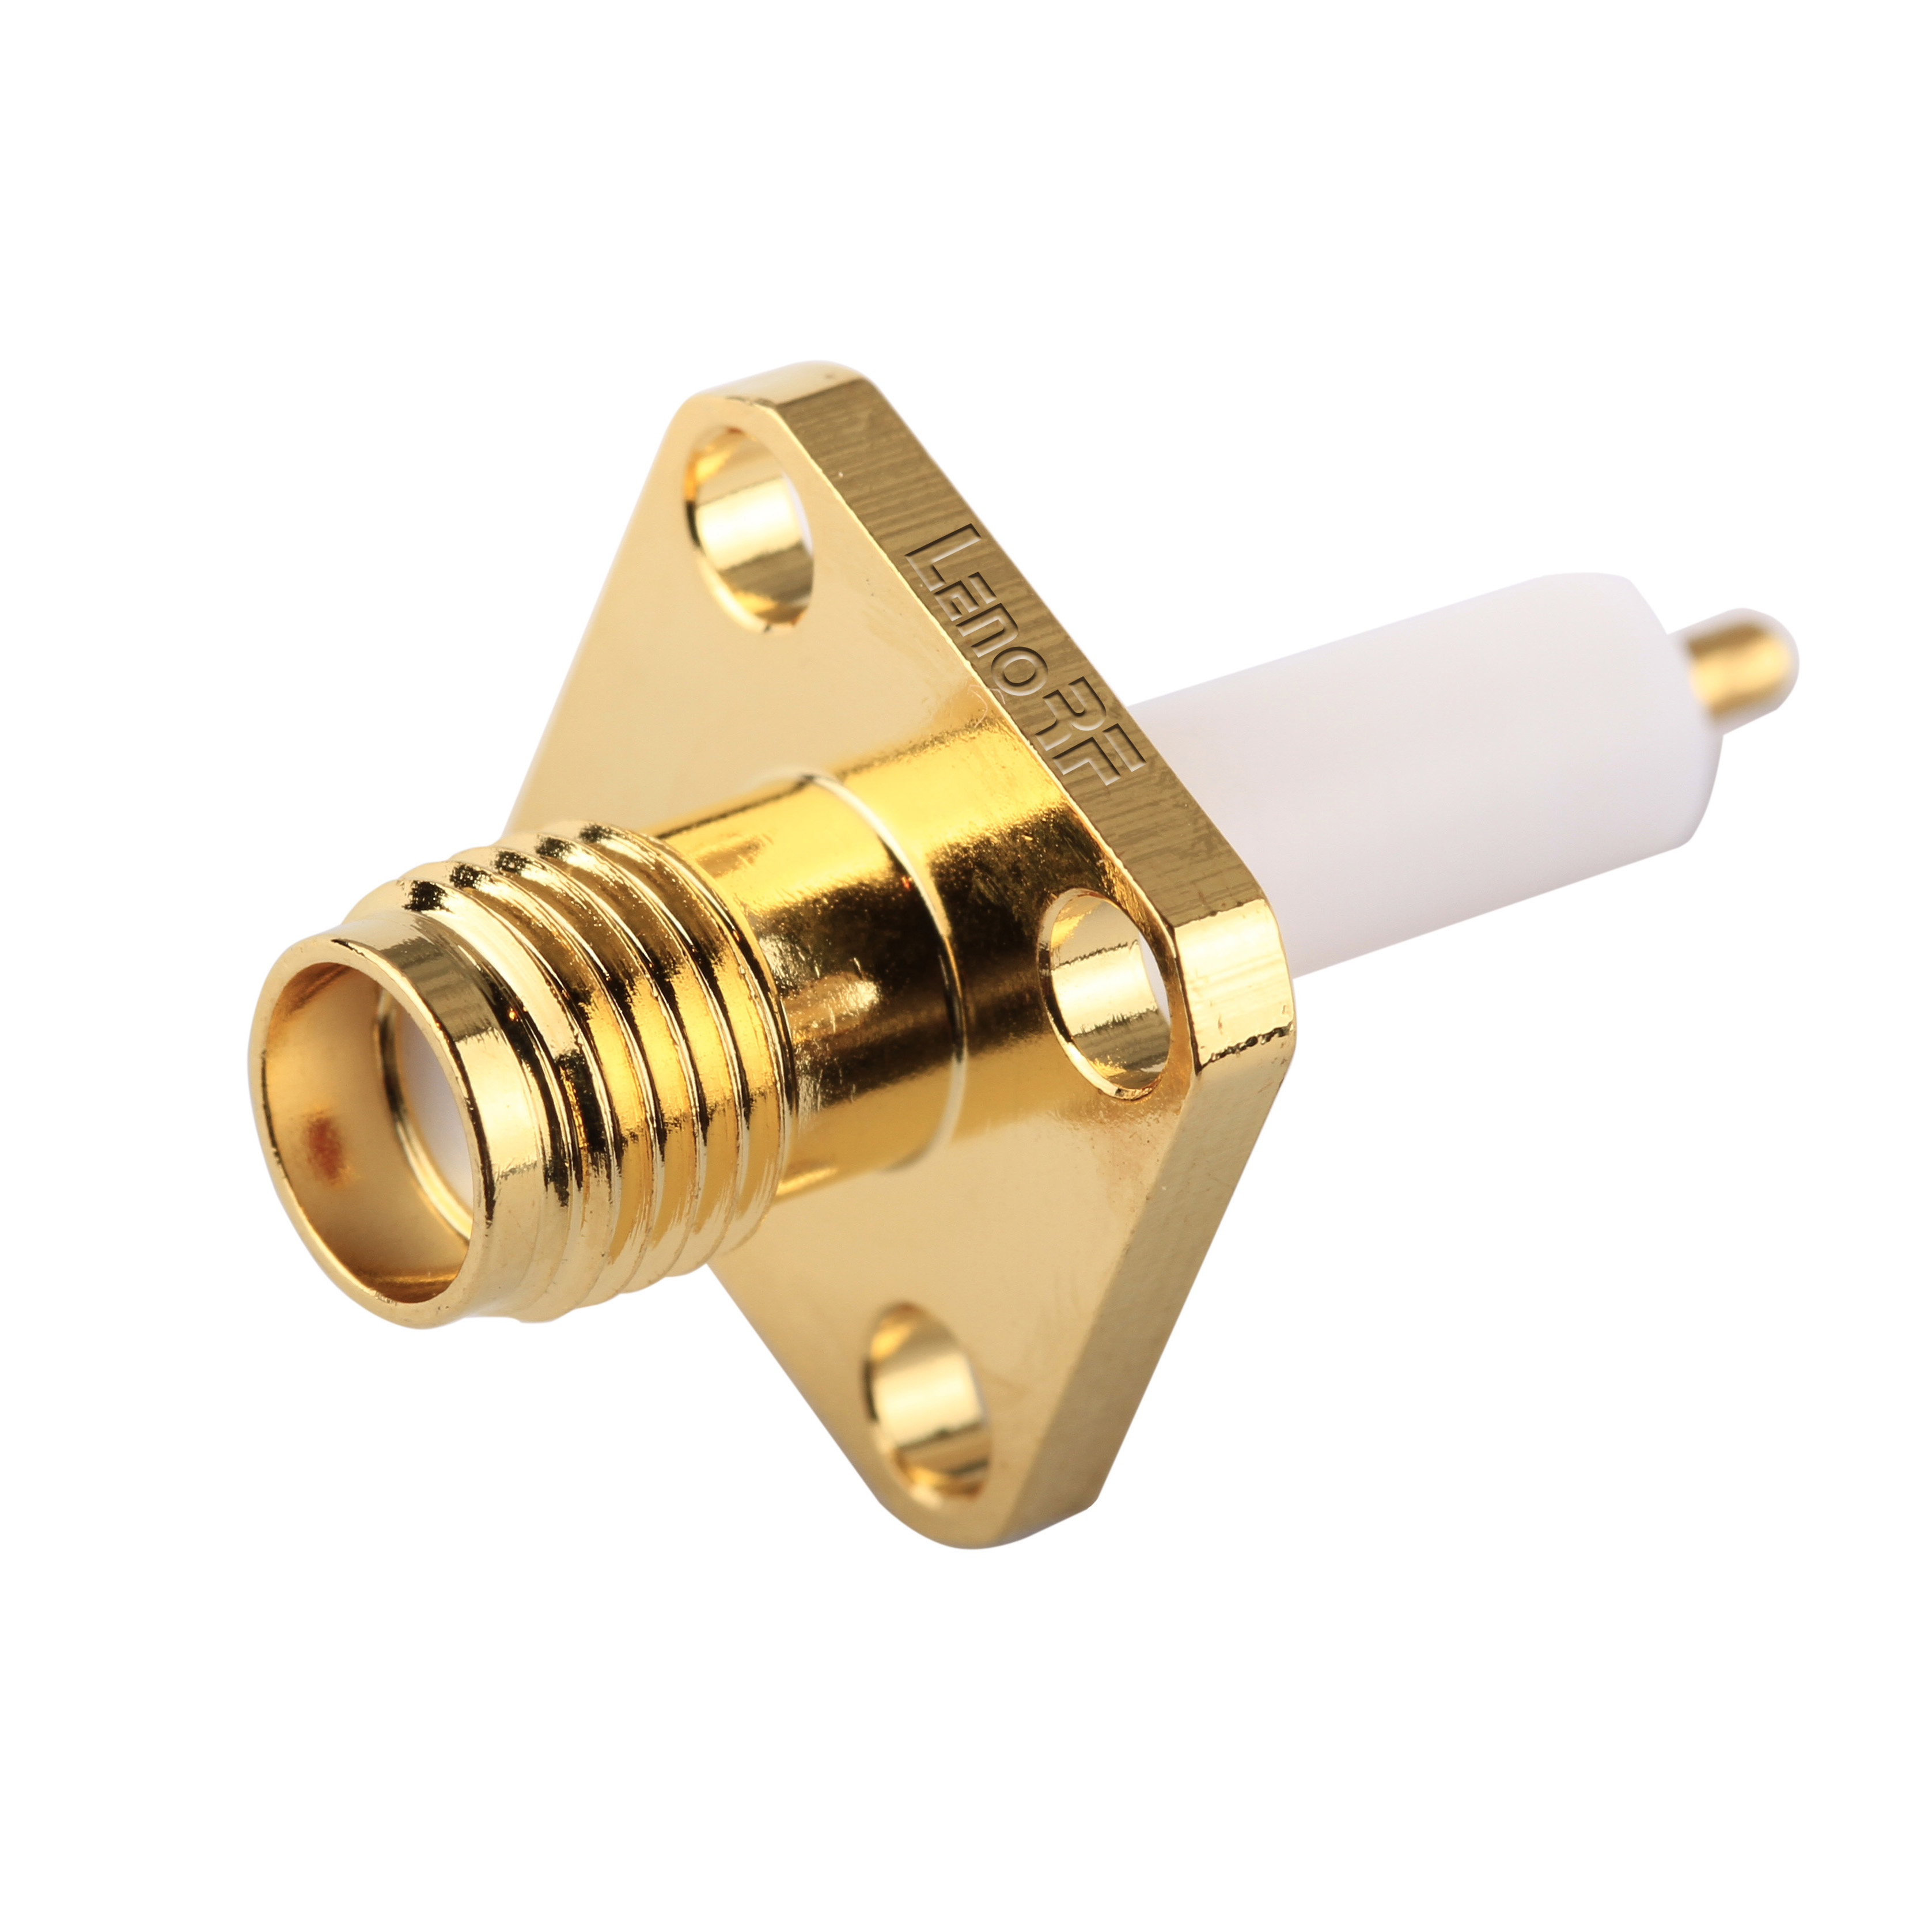 SMA Connector Jack 4 Hole Flange For Microstrip